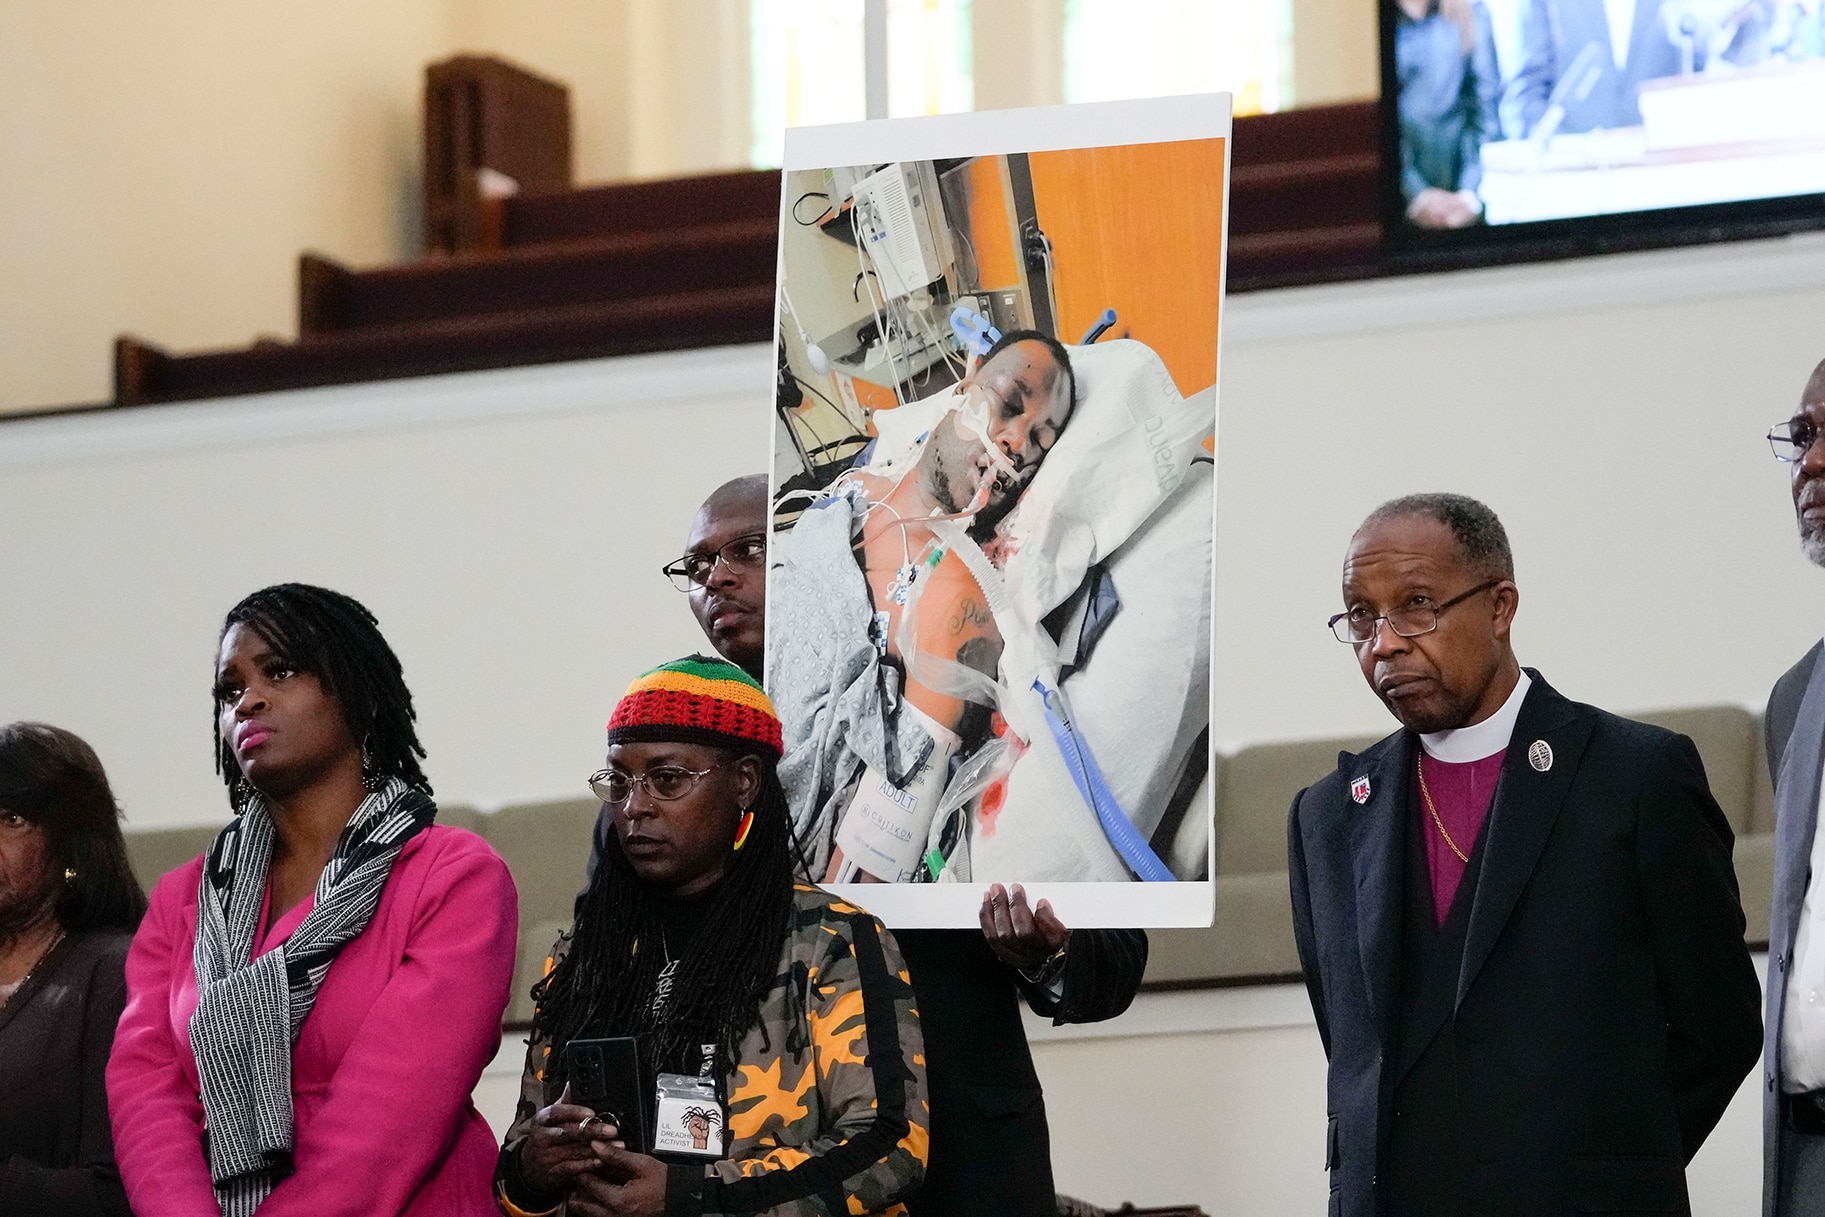 Family members and supporters hold a photograph of Tyre Nichols